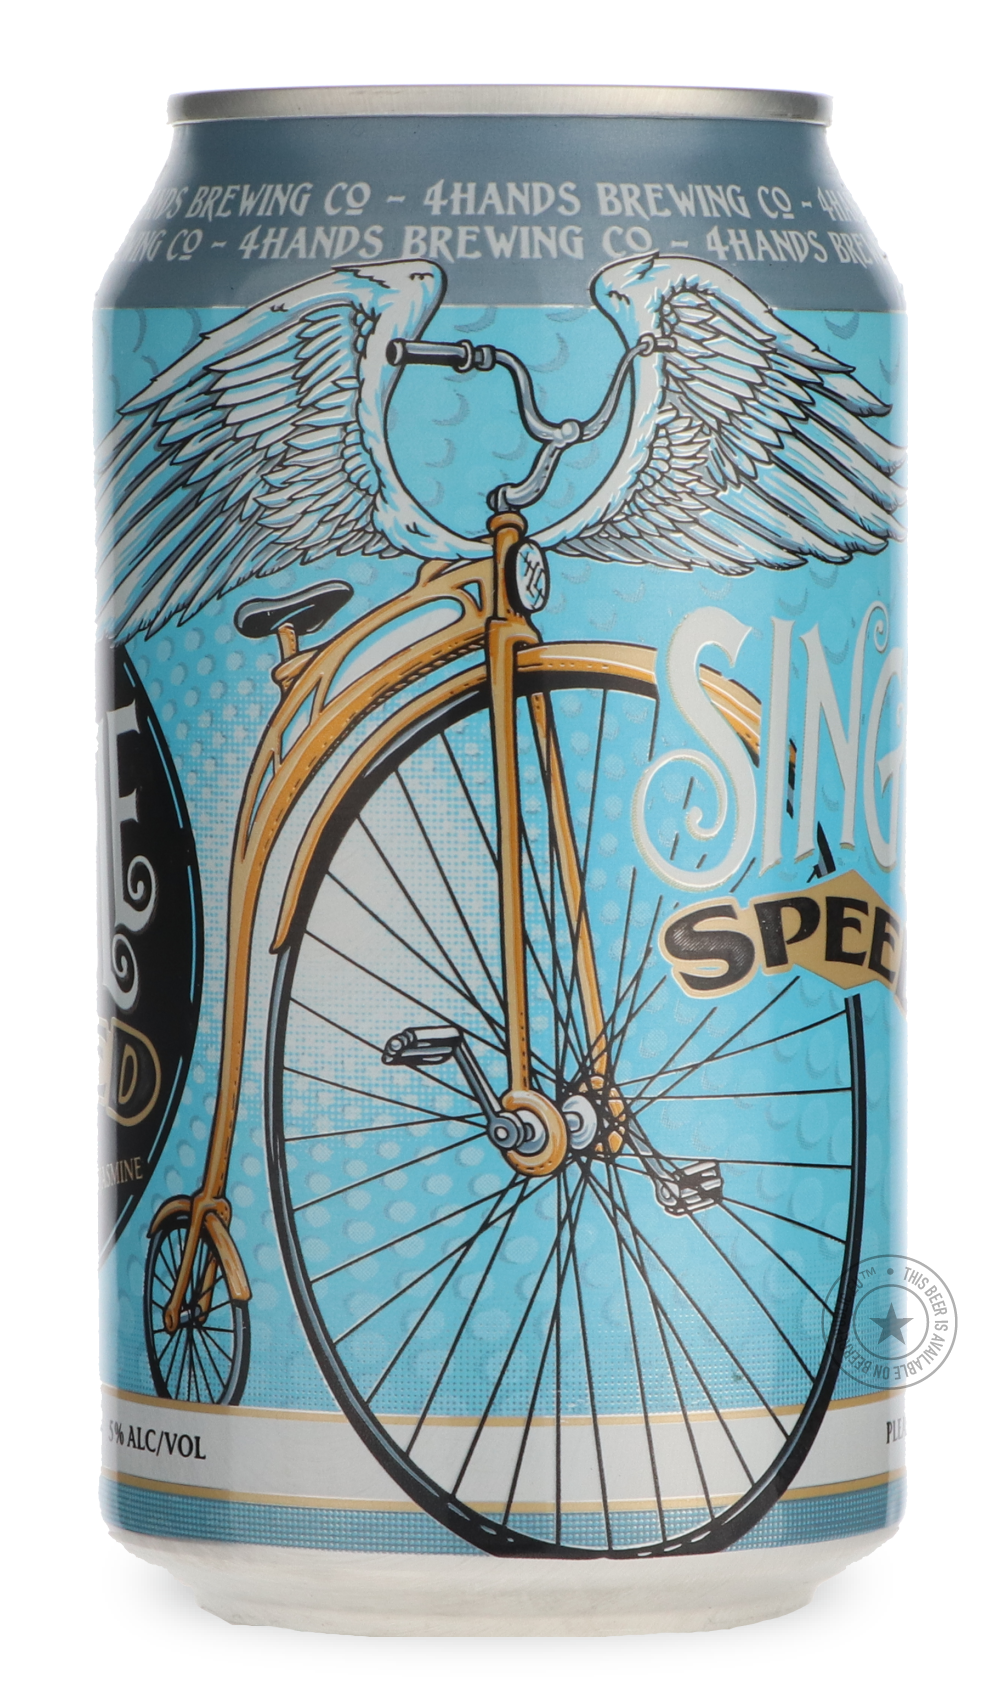 -4 Hands- Single Speed-Pale- Only @ Beer Republic - The best online beer store for American & Canadian craft beer - Buy beer online from the USA and Canada - Bier online kopen - Amerikaans bier kopen - Craft beer store - Craft beer kopen - Amerikanisch bier kaufen - Bier online kaufen - Acheter biere online - IPA - Stout - Porter - New England IPA - Hazy IPA - Imperial Stout - Barrel Aged - Barrel Aged Imperial Stout - Brown - Dark beer - Blond - Blonde - Pilsner - Lager - Wheat - Weizen - Amber - Barley Wi